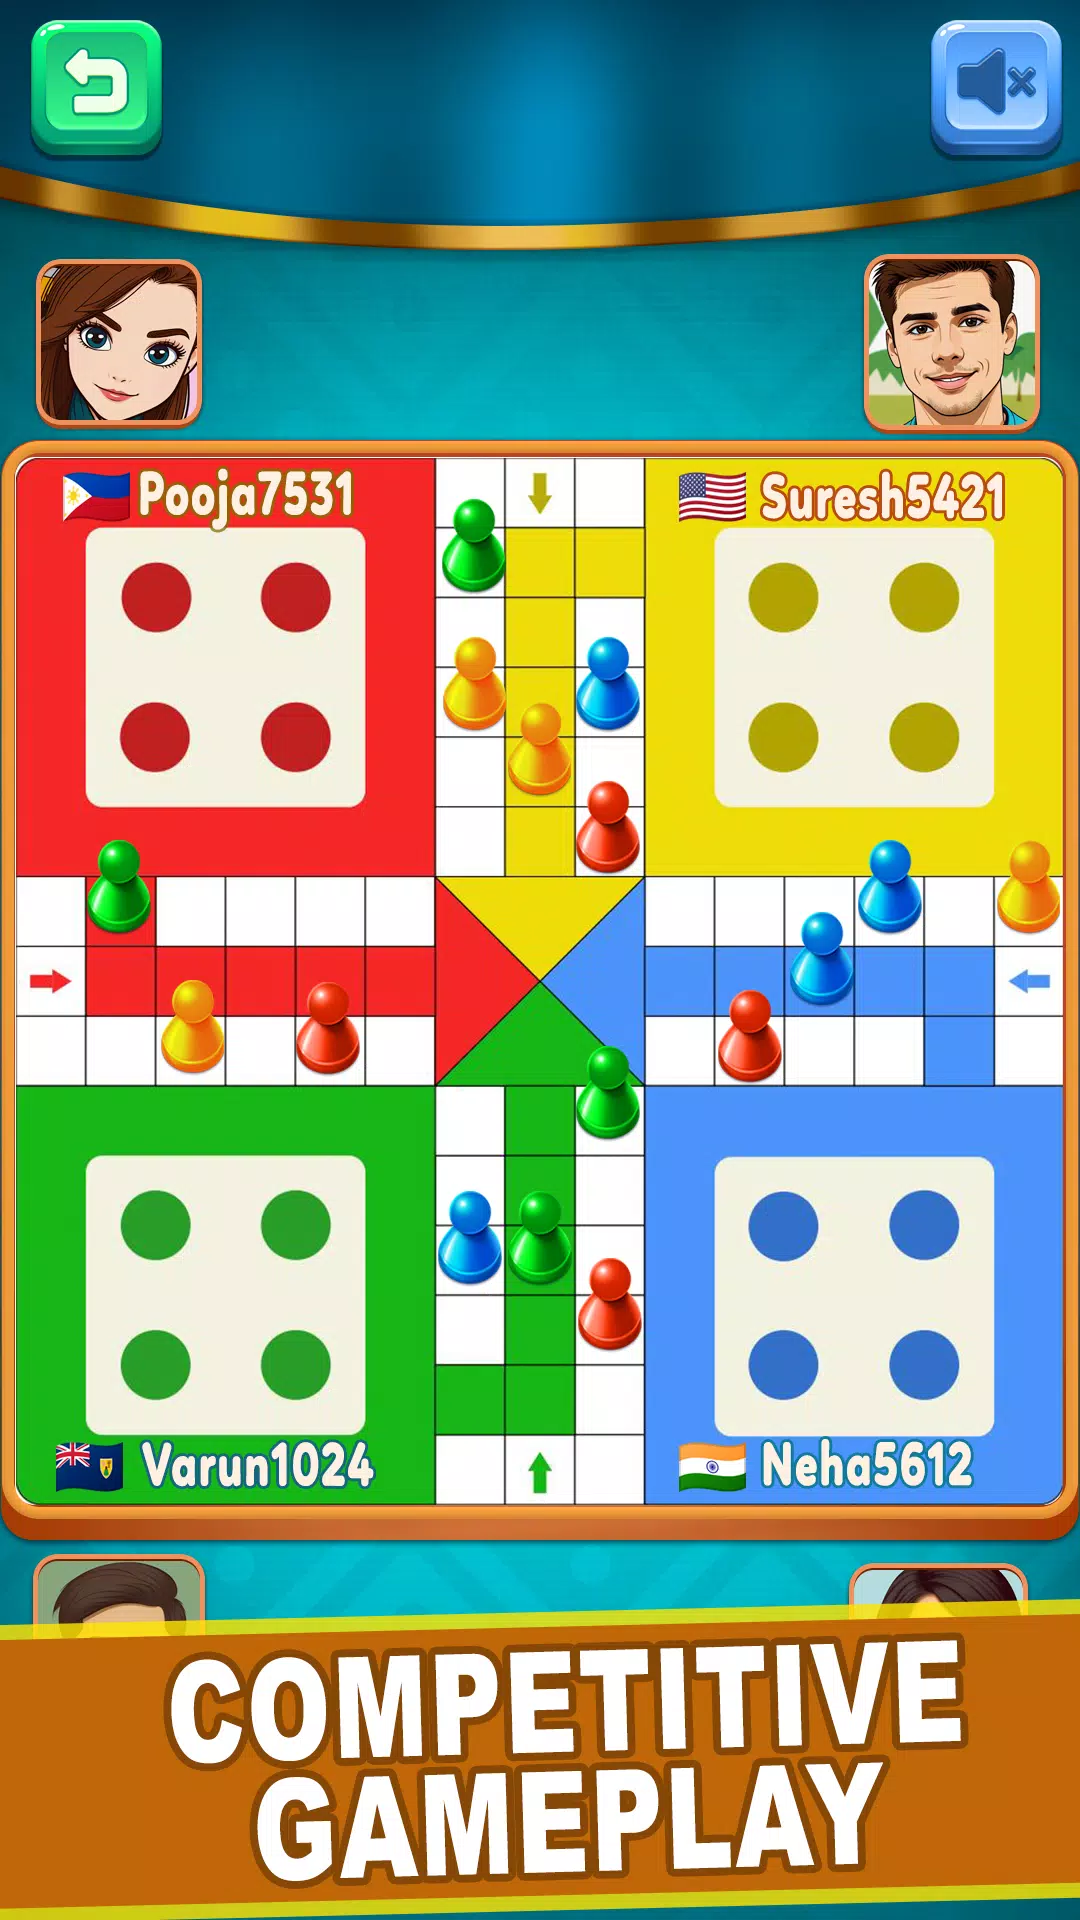 Online Ludo Competition Nepal